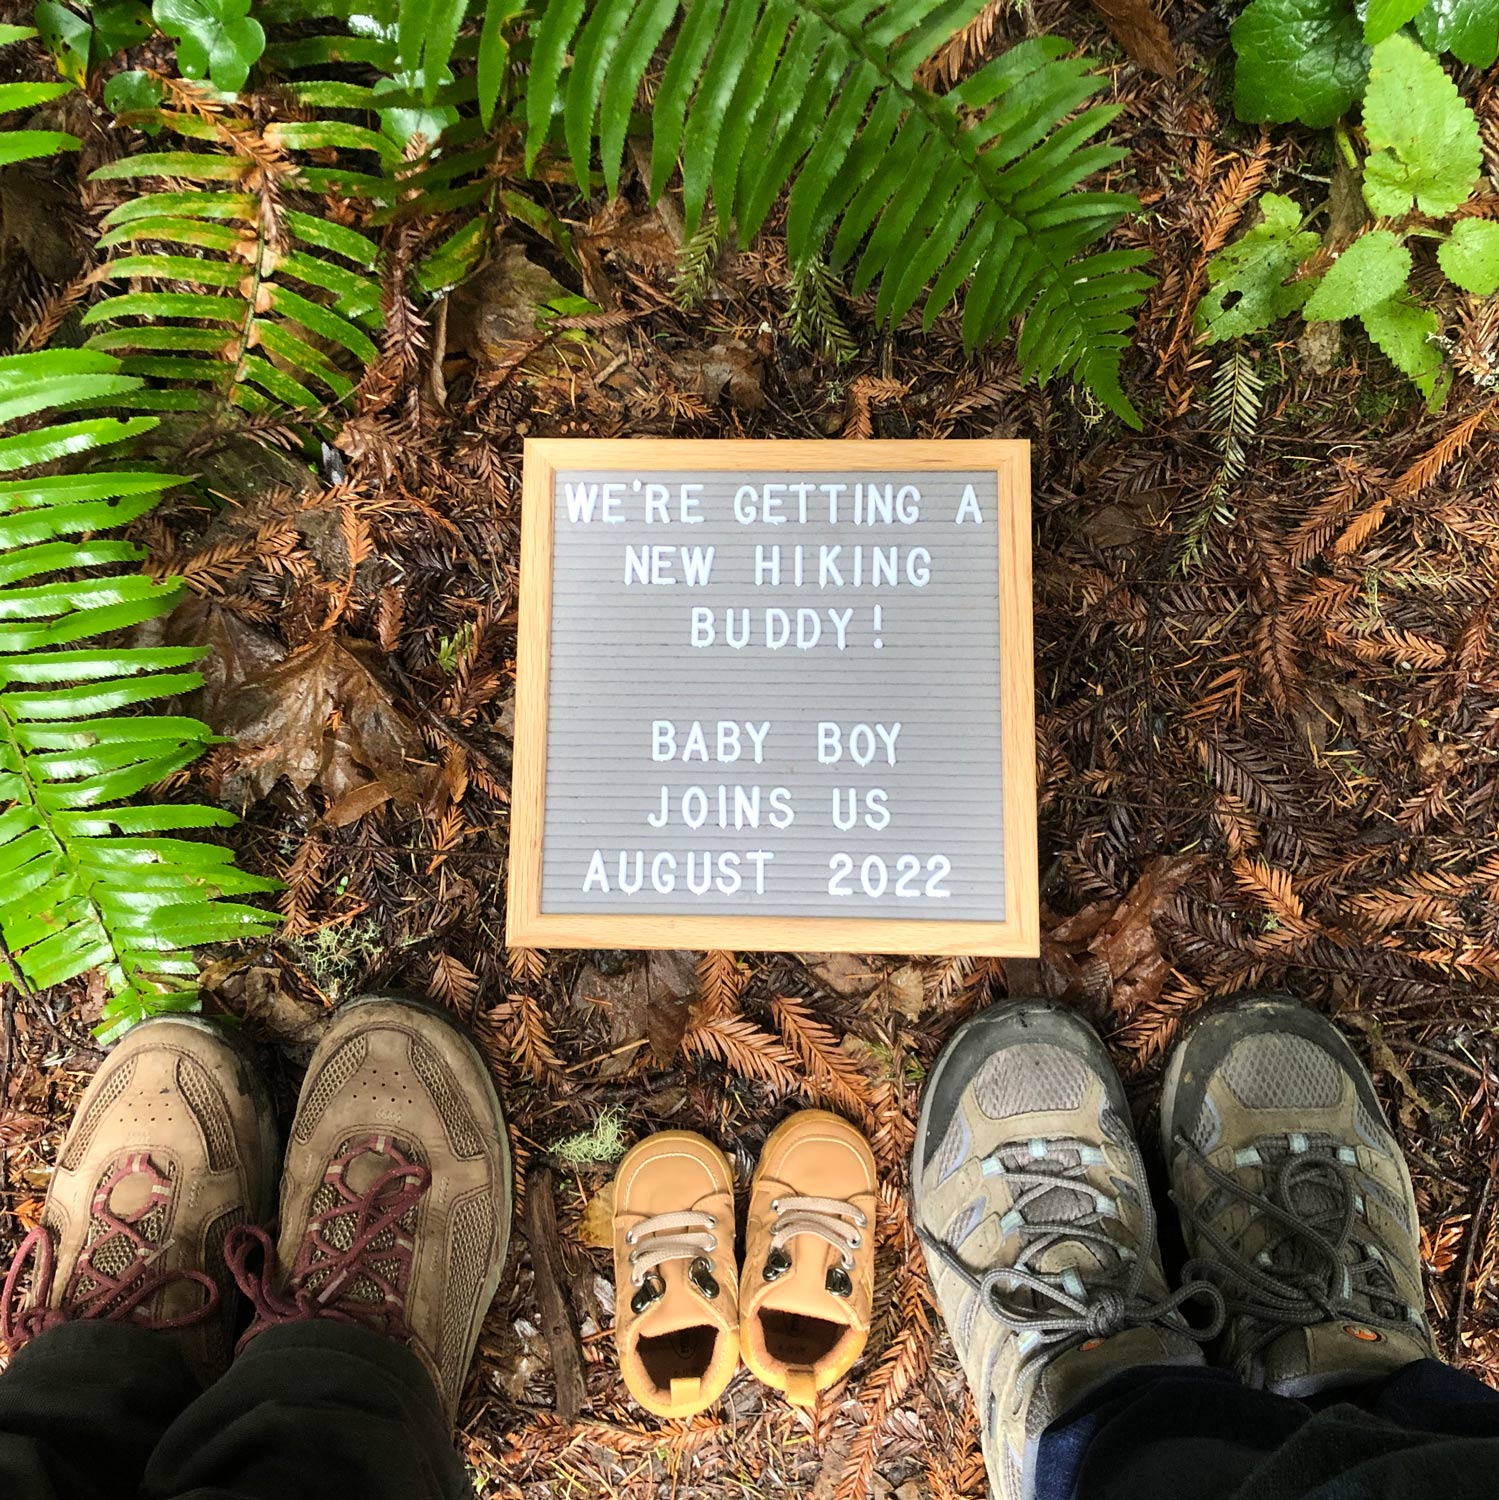 a sign that says "We're getting a new hiking buddy! baby boy joins us august 2022"